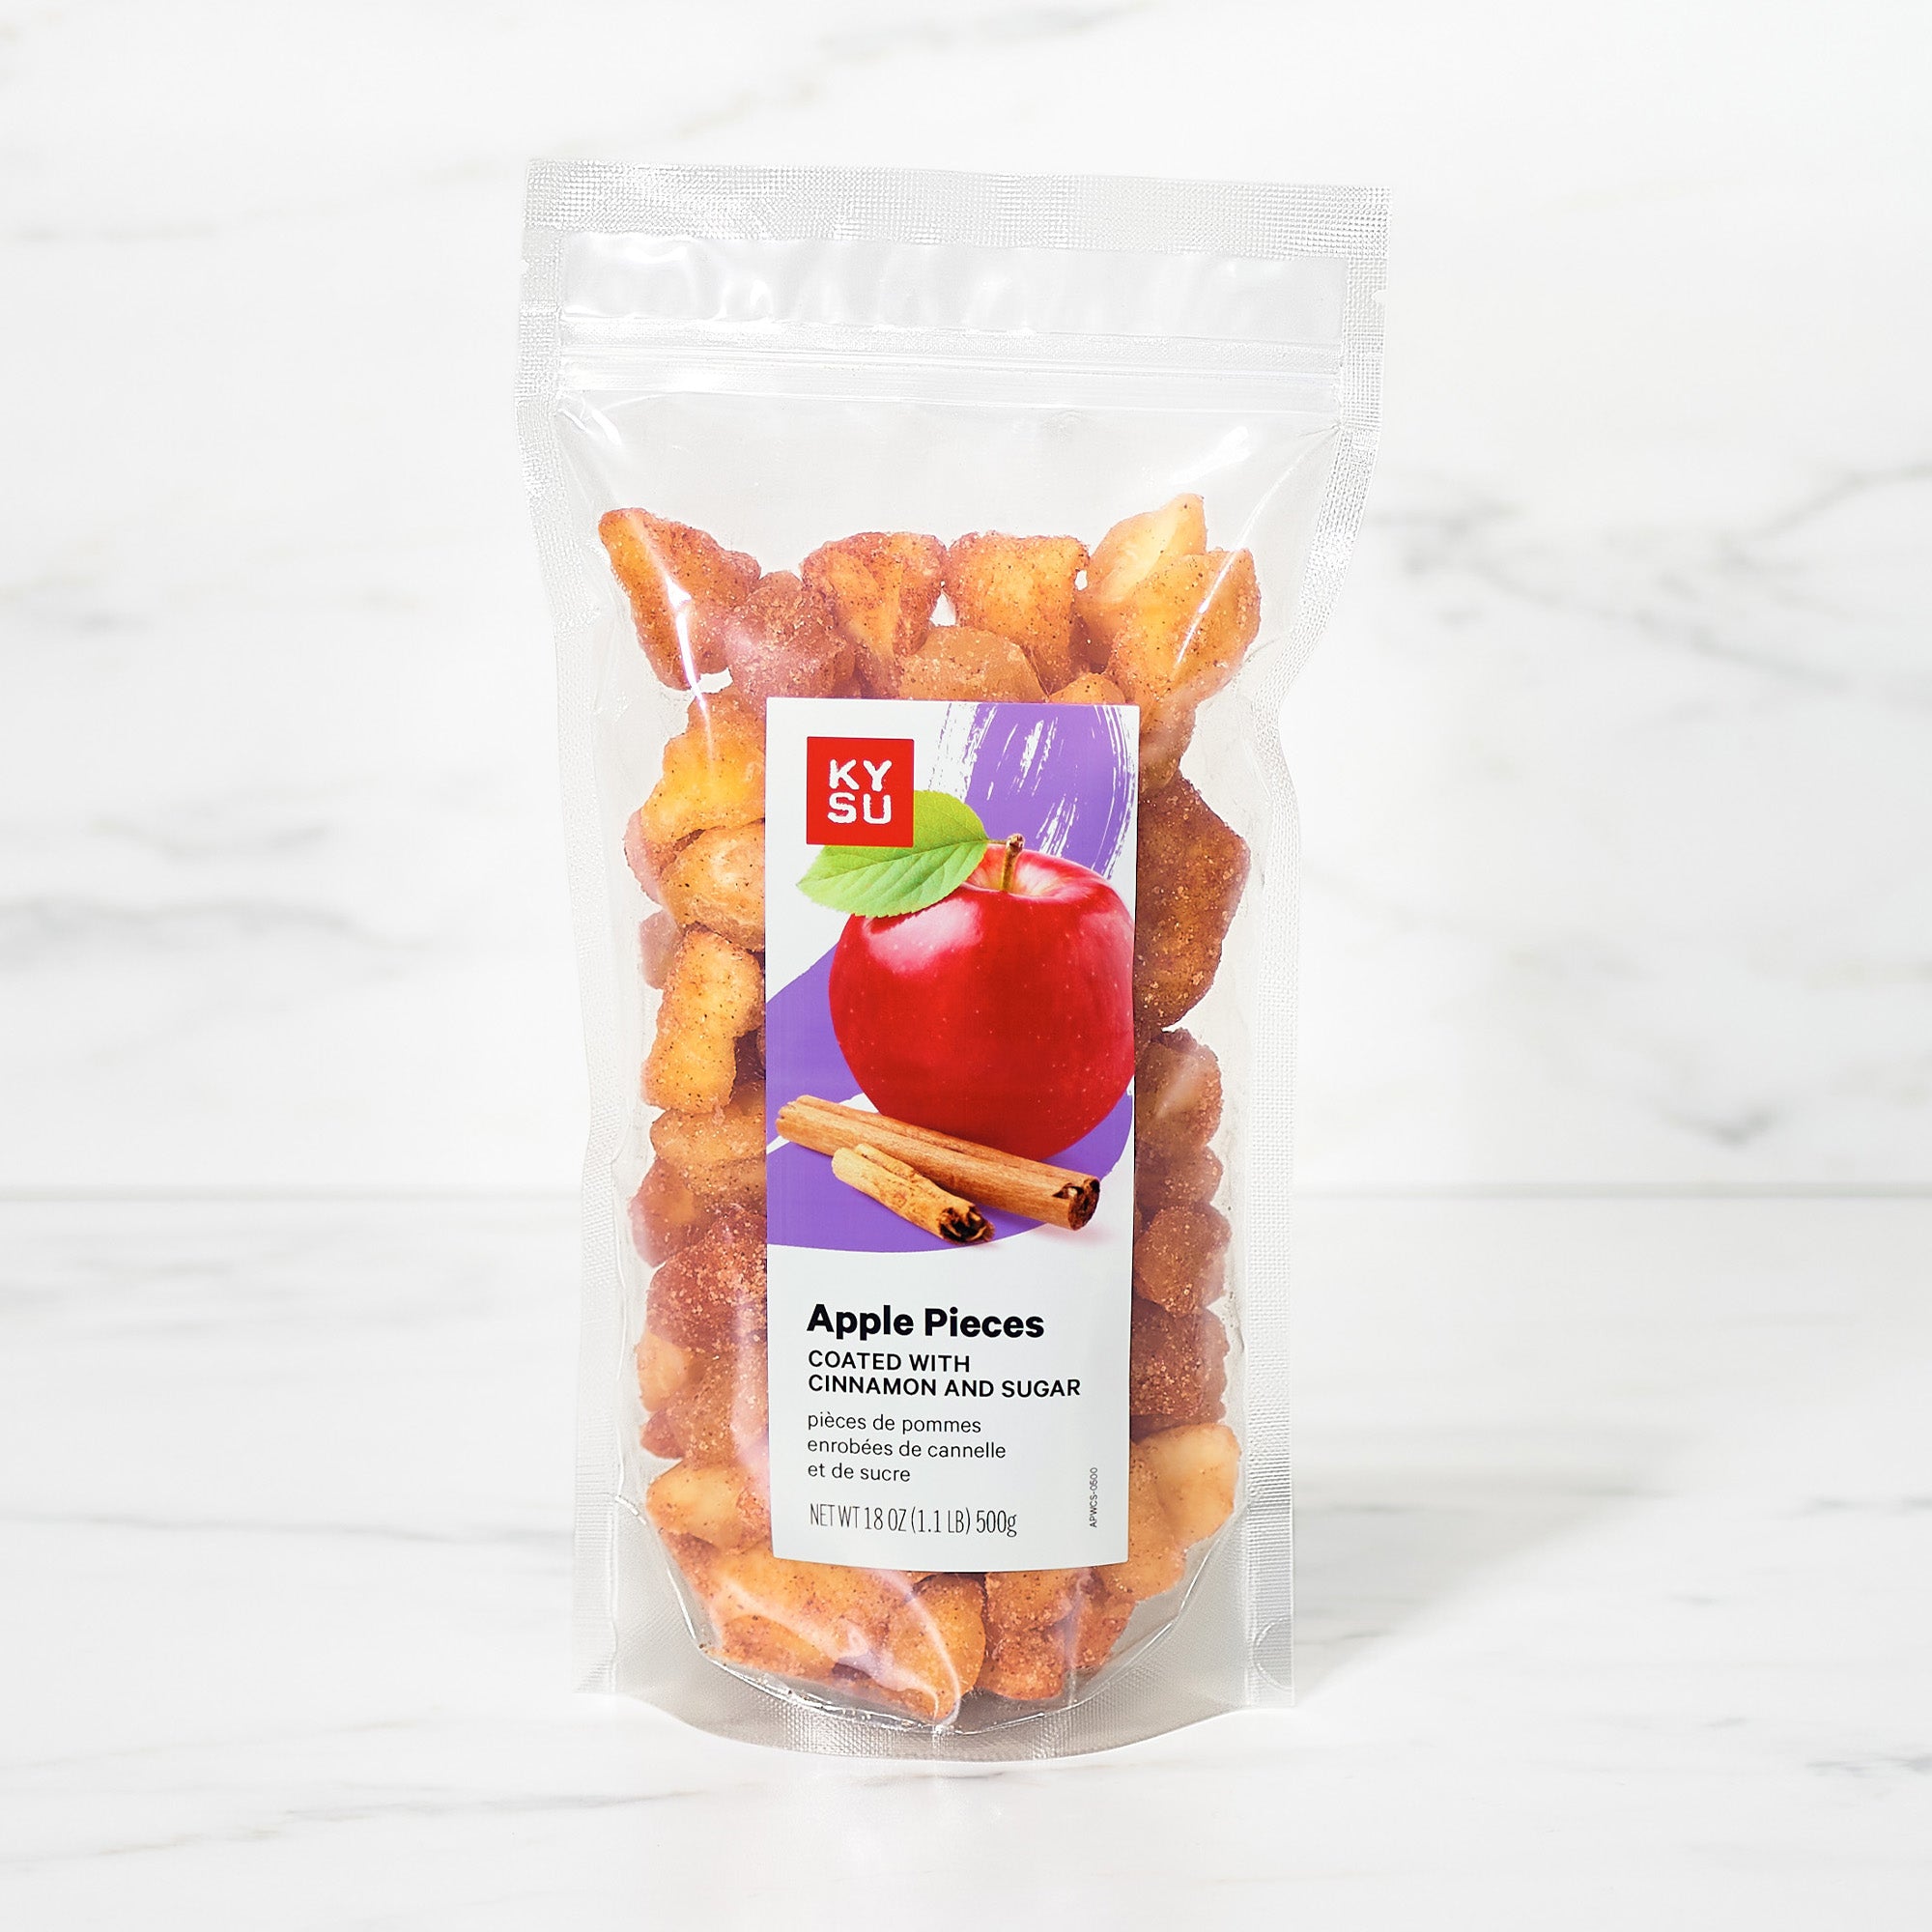 Apple pieces coated with cinnamon and sugar, 1.1 lb